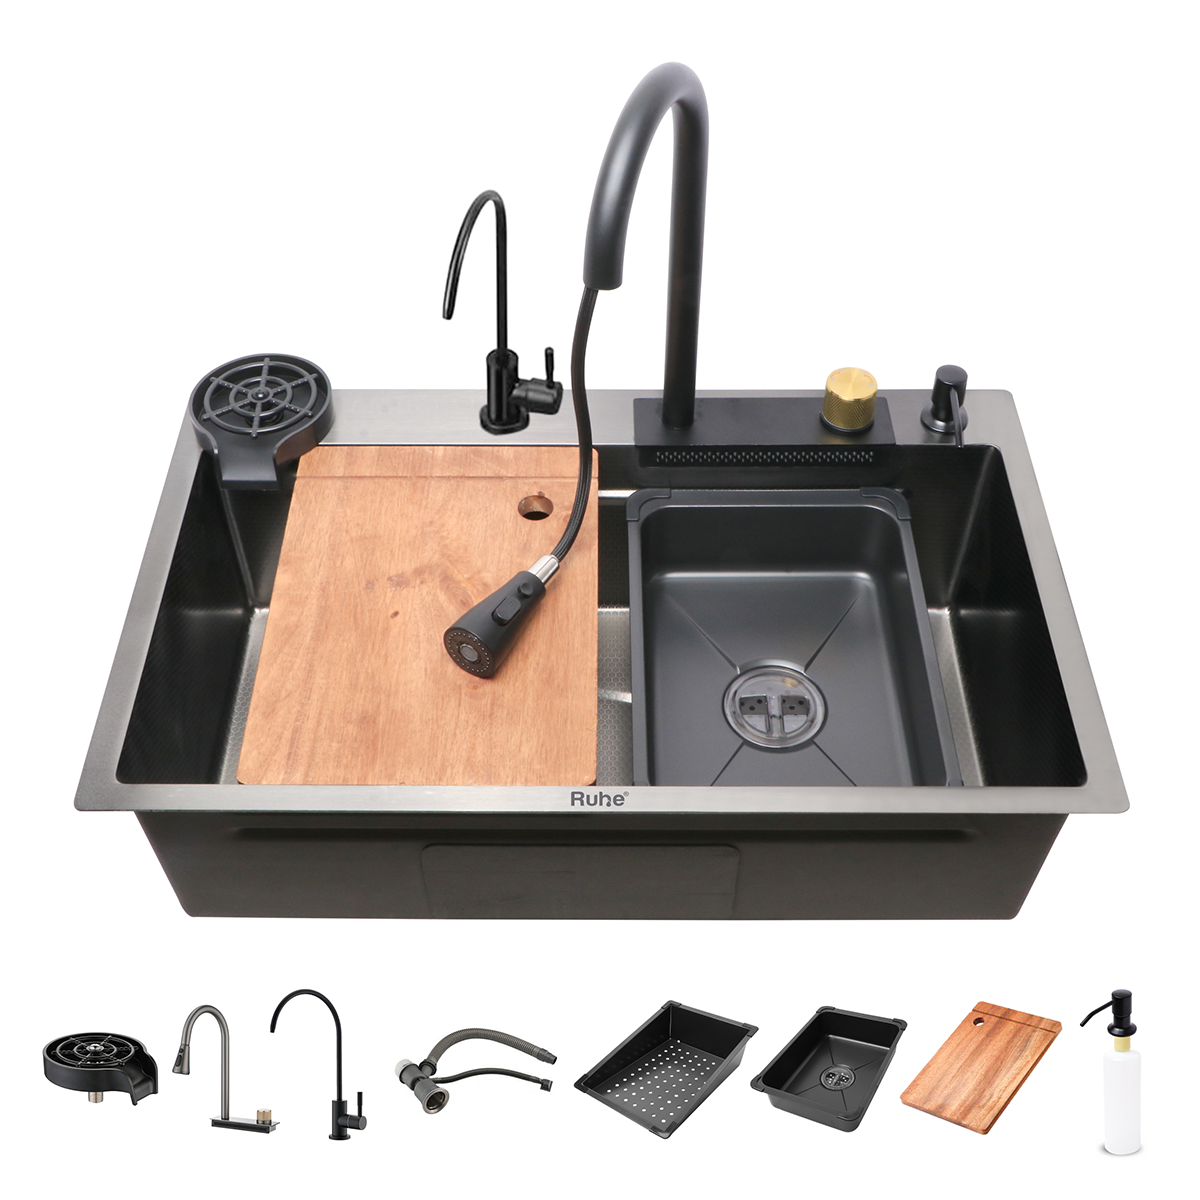  Handmade Premium Nano Kitchen Sink with Integrated Waterfall, Pull-Out & RO Faucet (30 x 18 x 9 Inches) 9